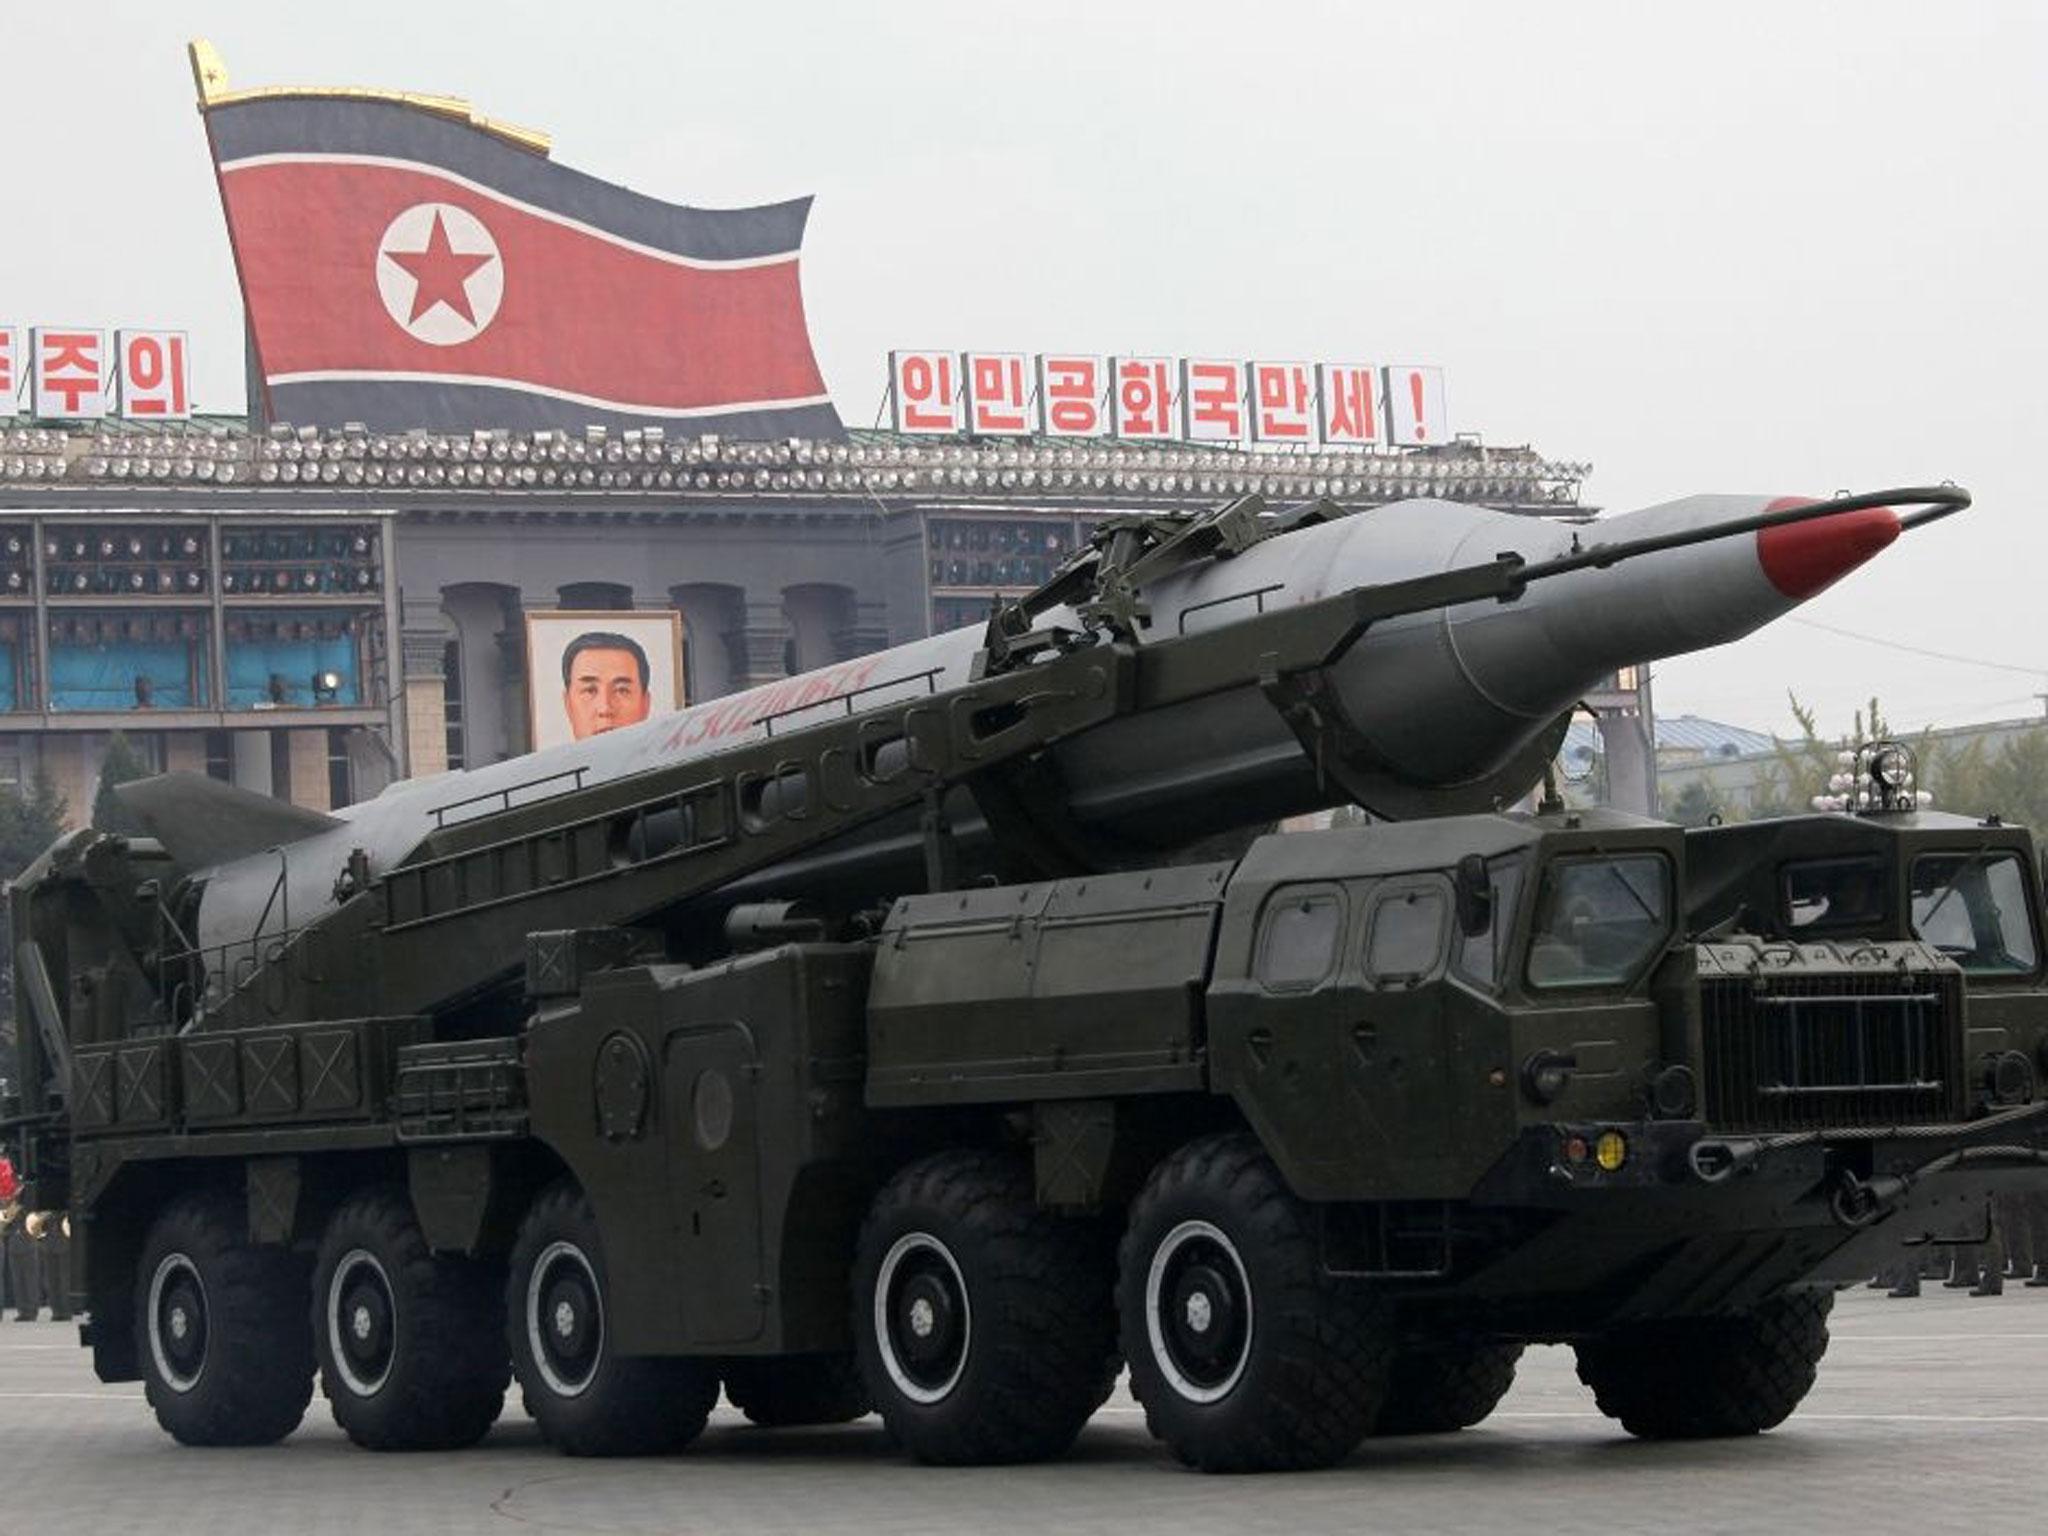 North Korea missiles on trucks make its way during a massive military parade to mark the 65th anniversary of the communist nation's ruling Workers' Party in Pyongyang, North Korea